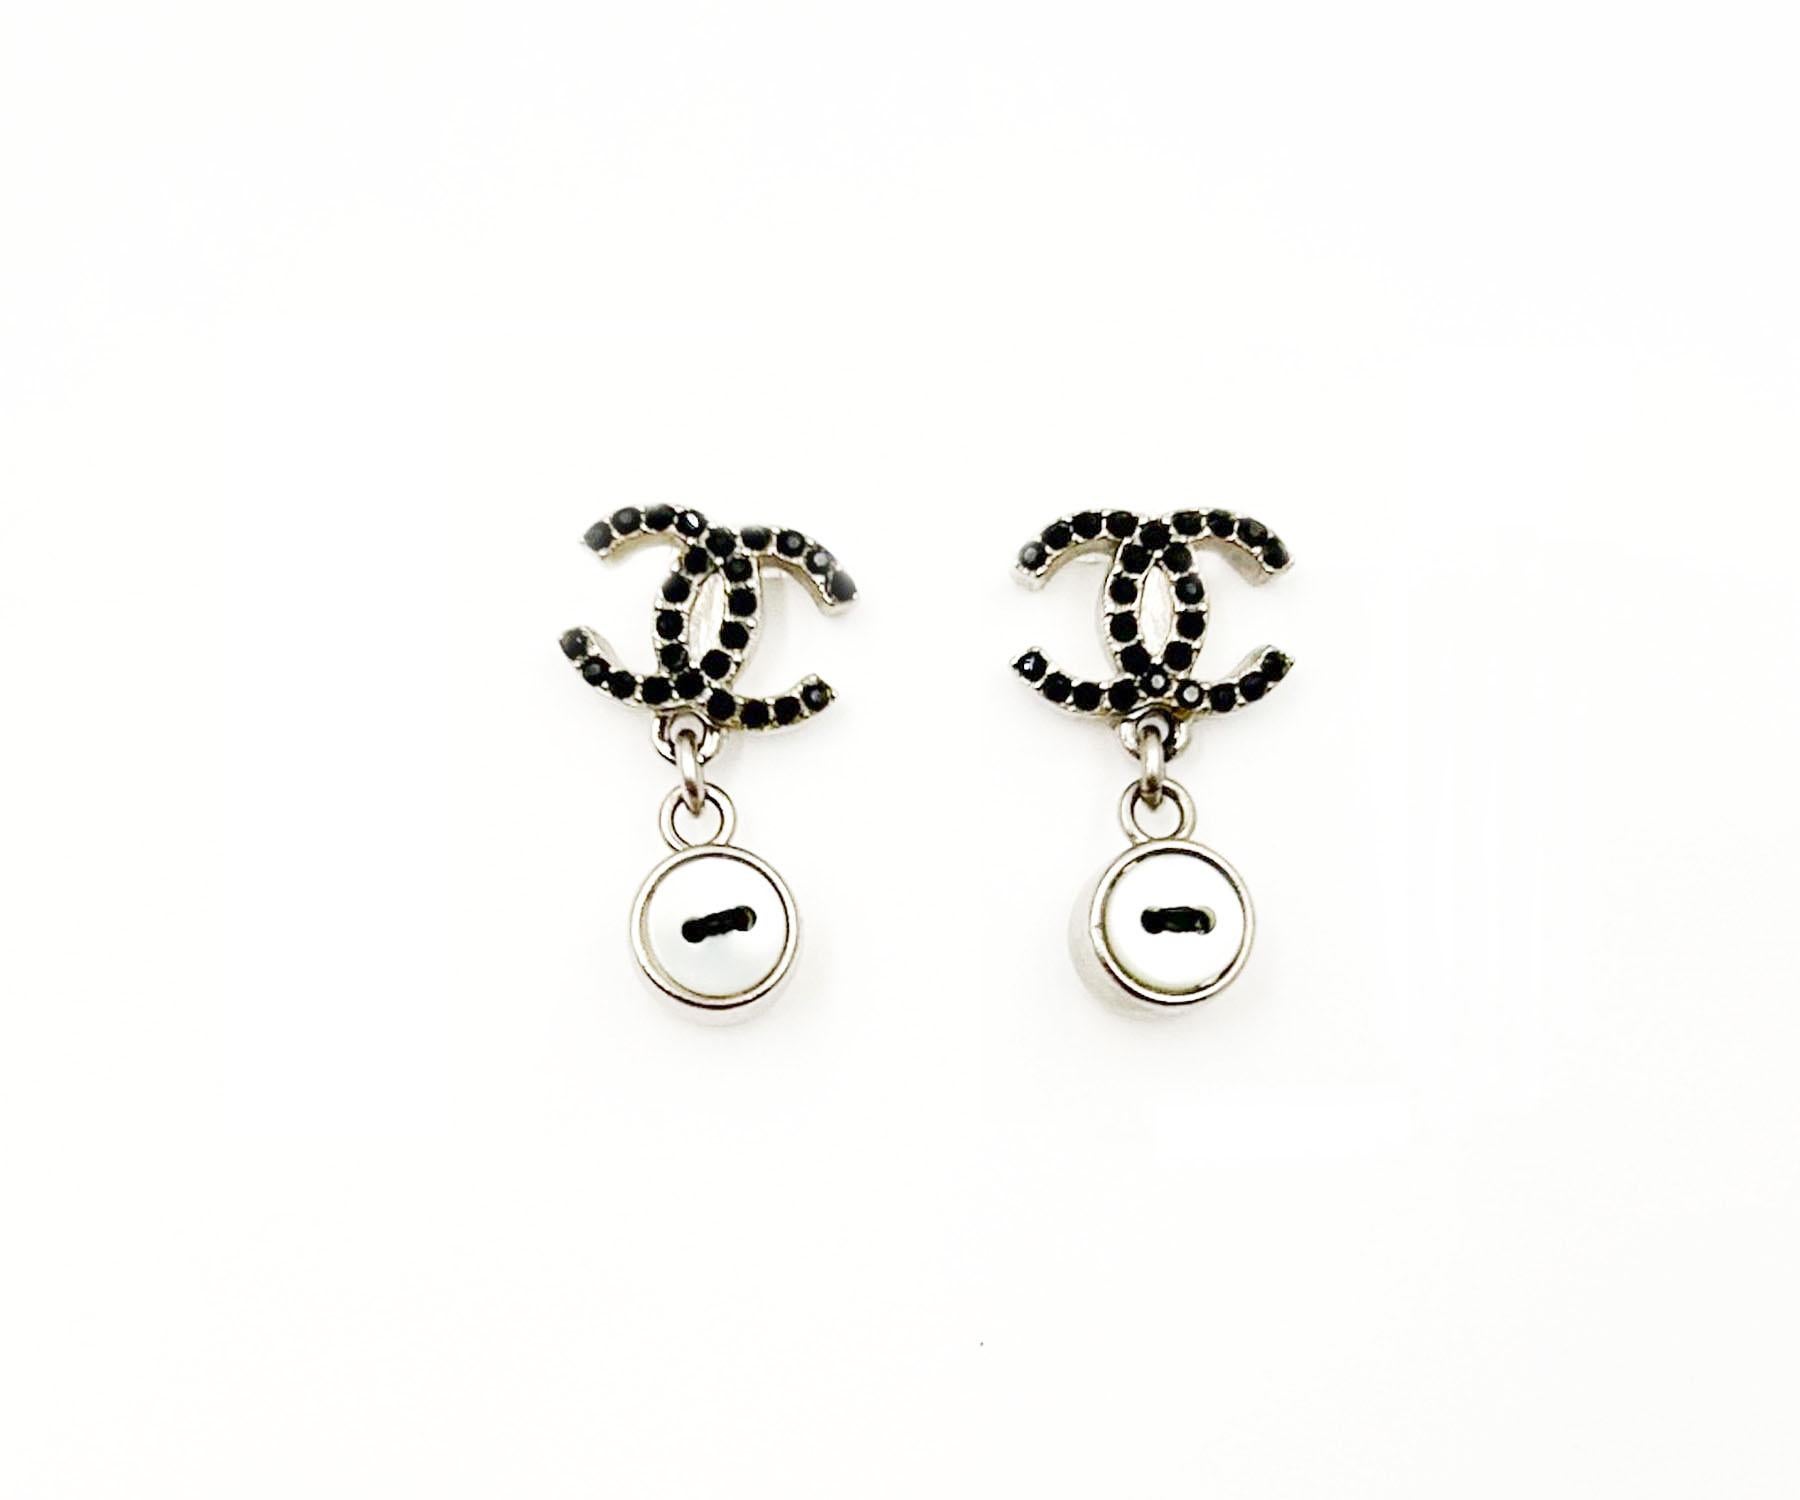 Chanel Silver CC Black Crystal Mother of Pearl Button Earrings

* Marked 08
* Made in France

-It is approximately 0.75